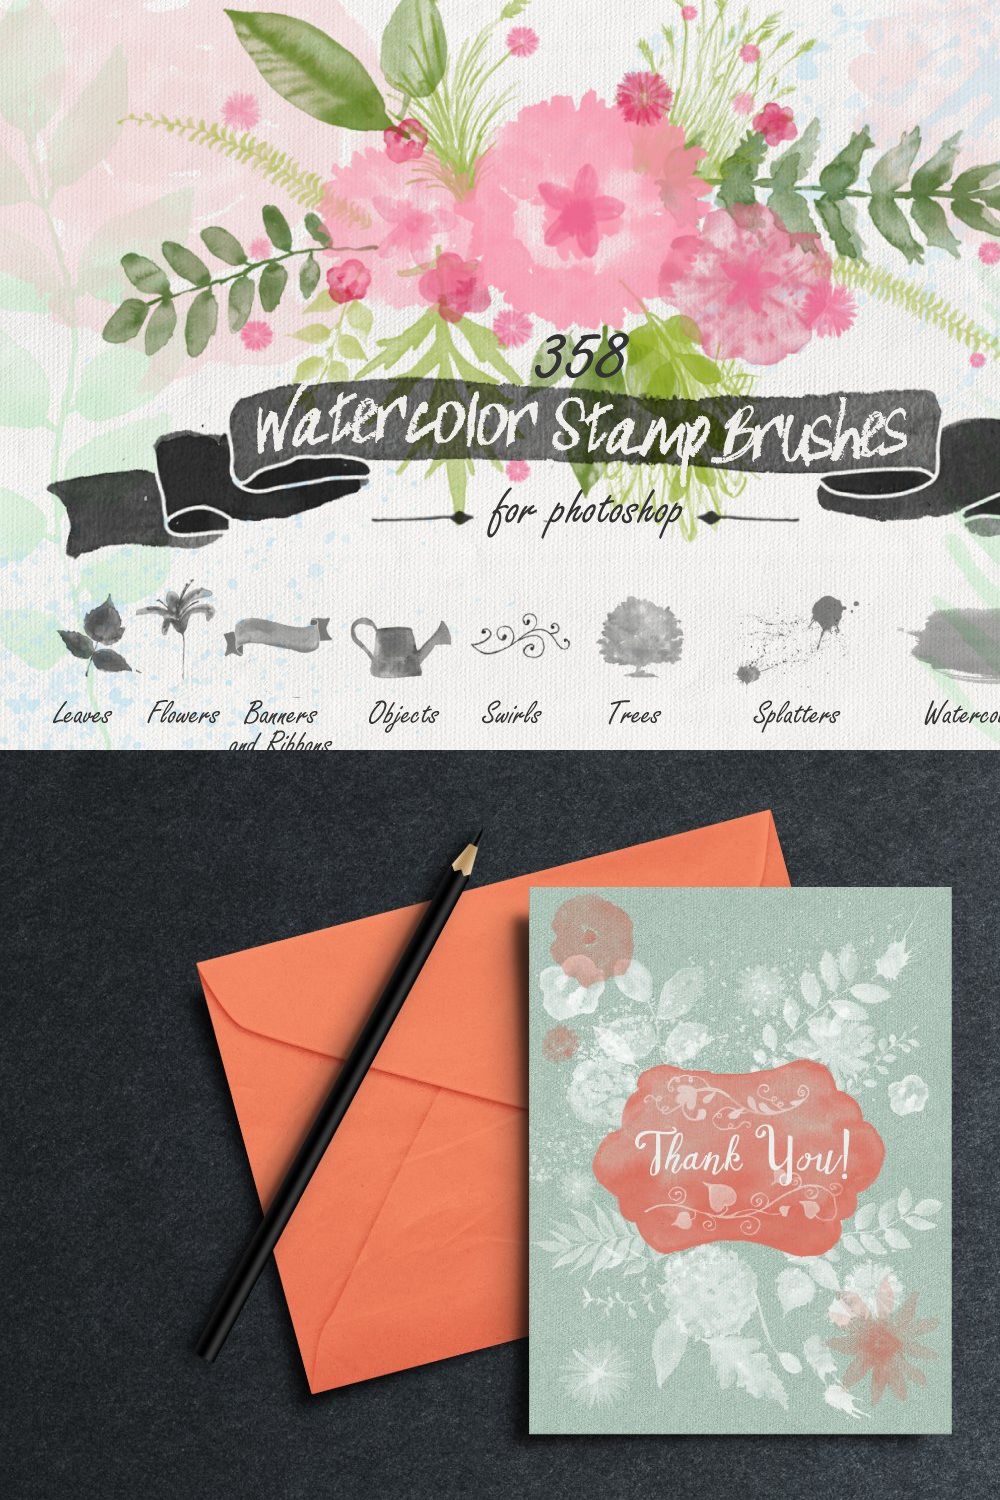 Floral Watercolor PS Stamp Brushes pinterest preview image.